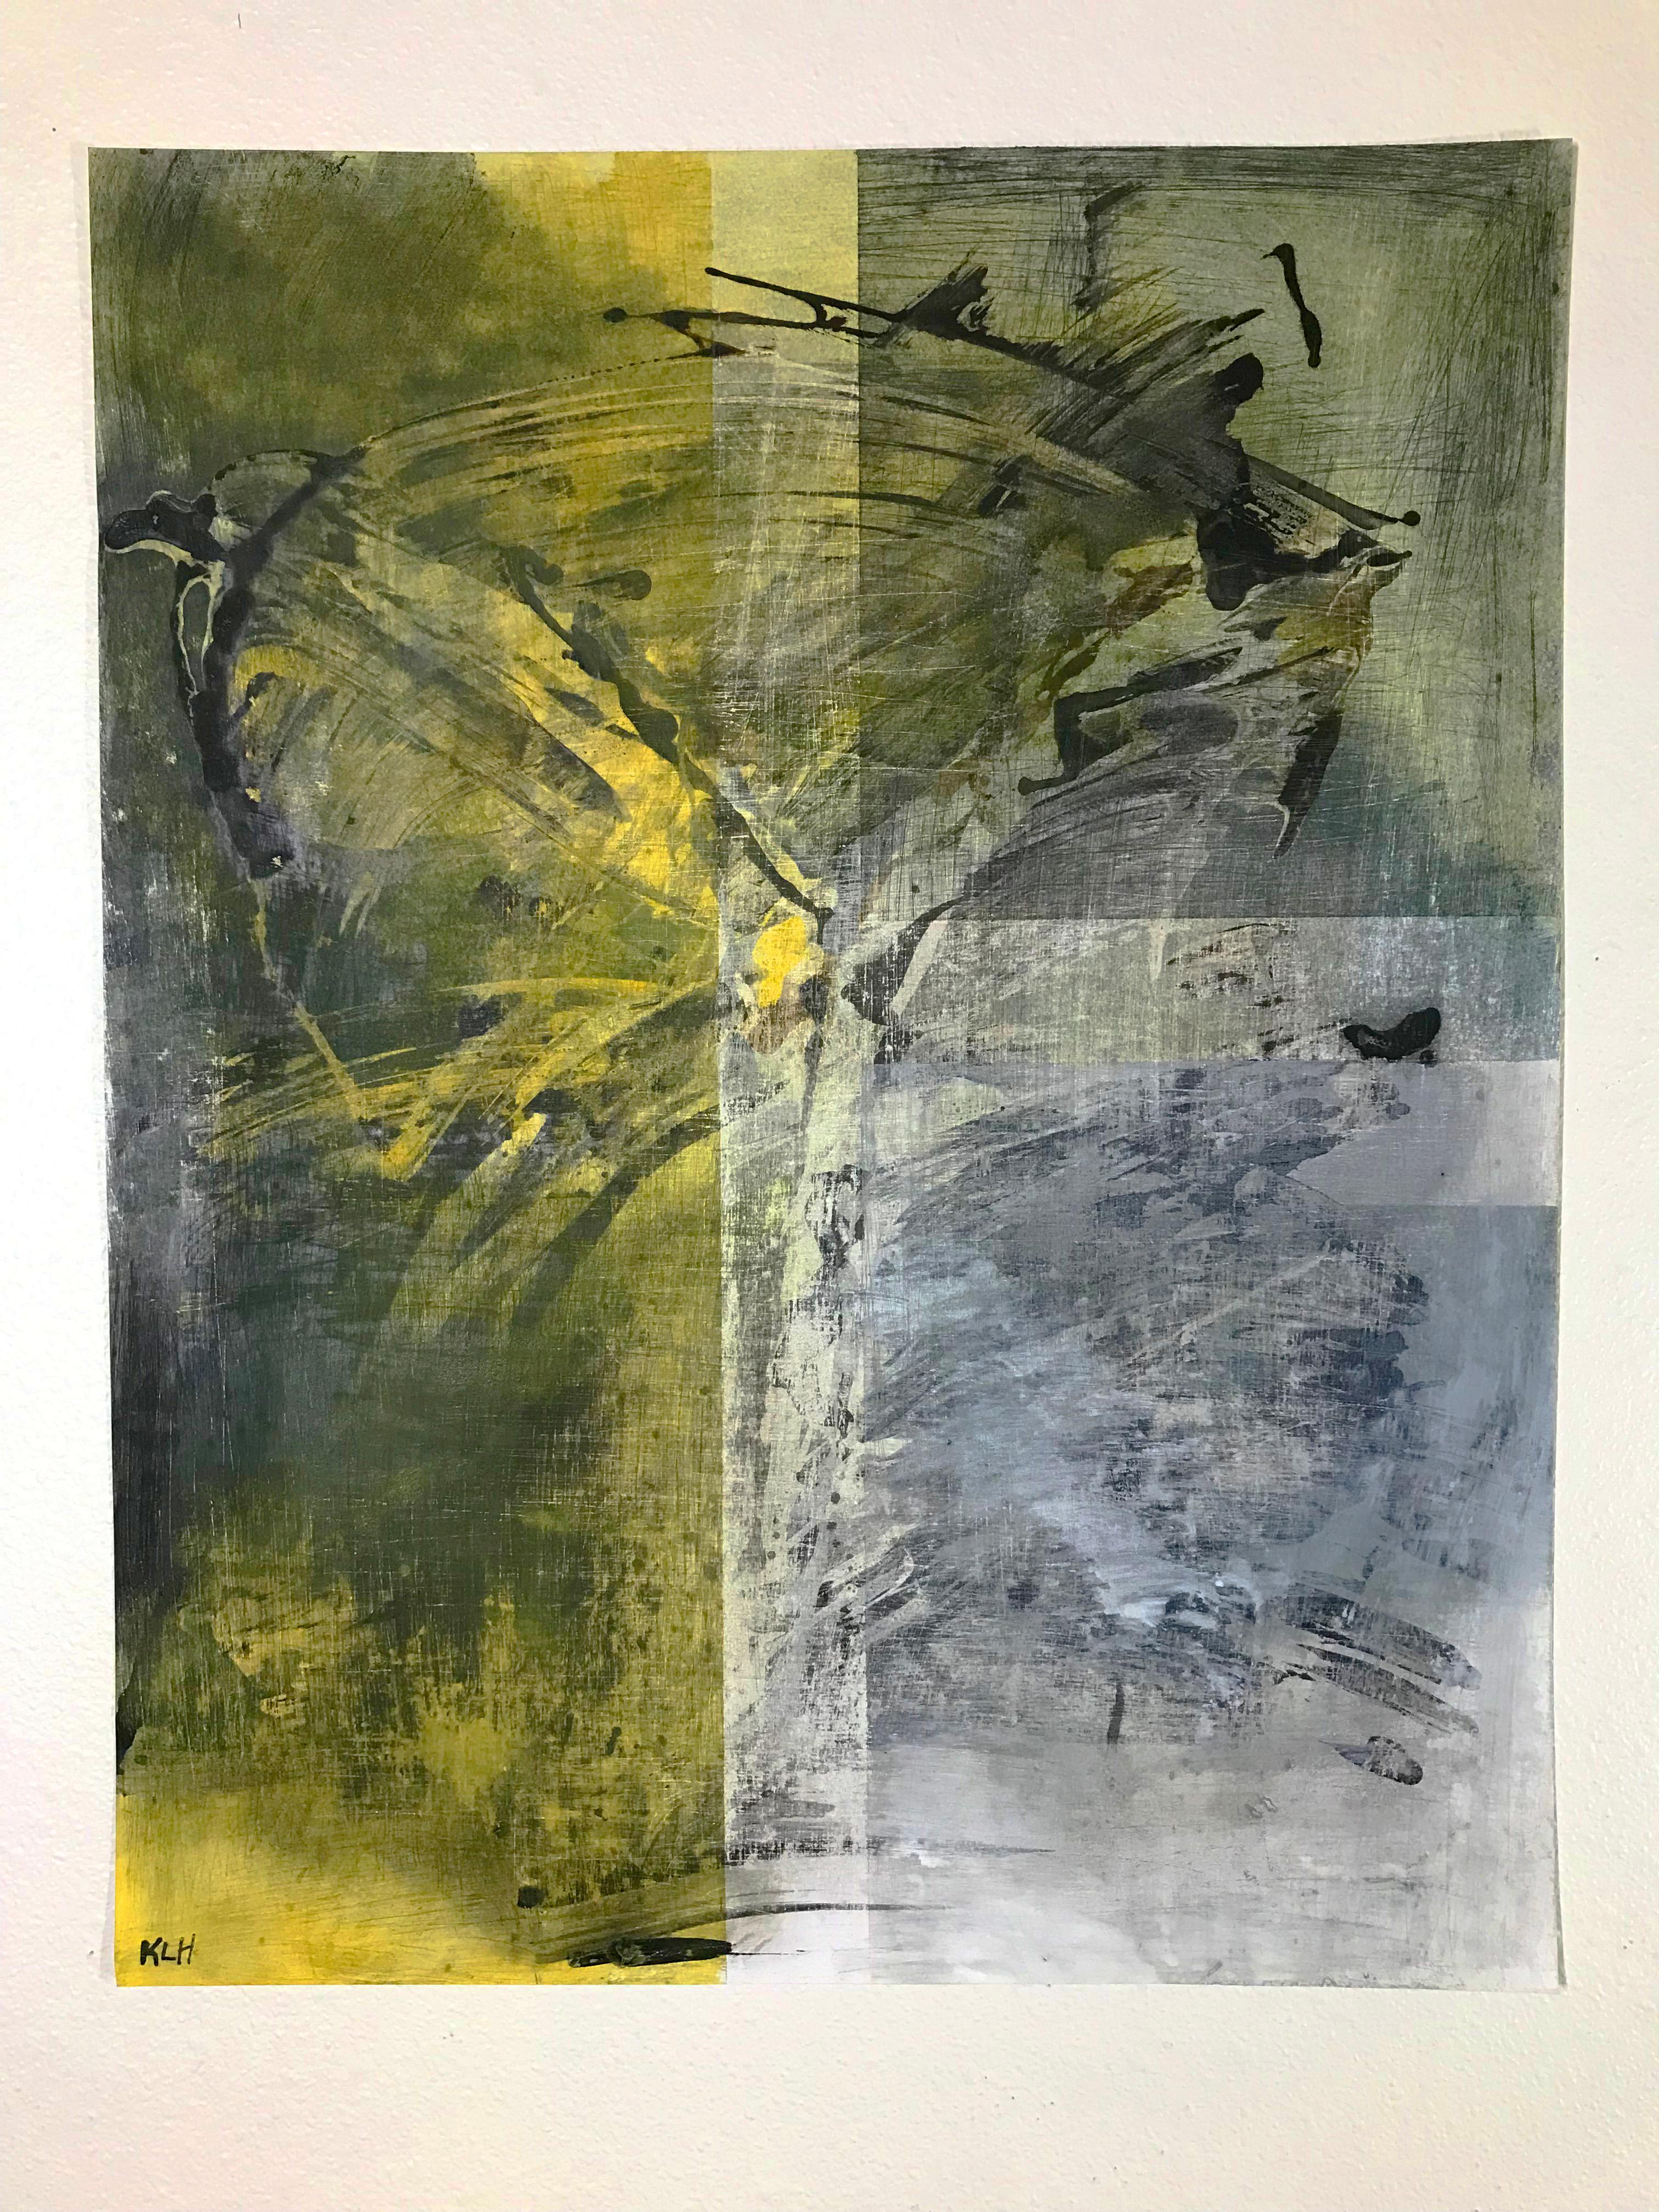 <p>Artist Comments<br>Artist Kris Haas depicts an abstract image with vigorous strokes and strong emotions. With colors of black, yellow, and beige, the piece cuts in sections where movement bleeds through. Part of Kris' derivative and ongoing